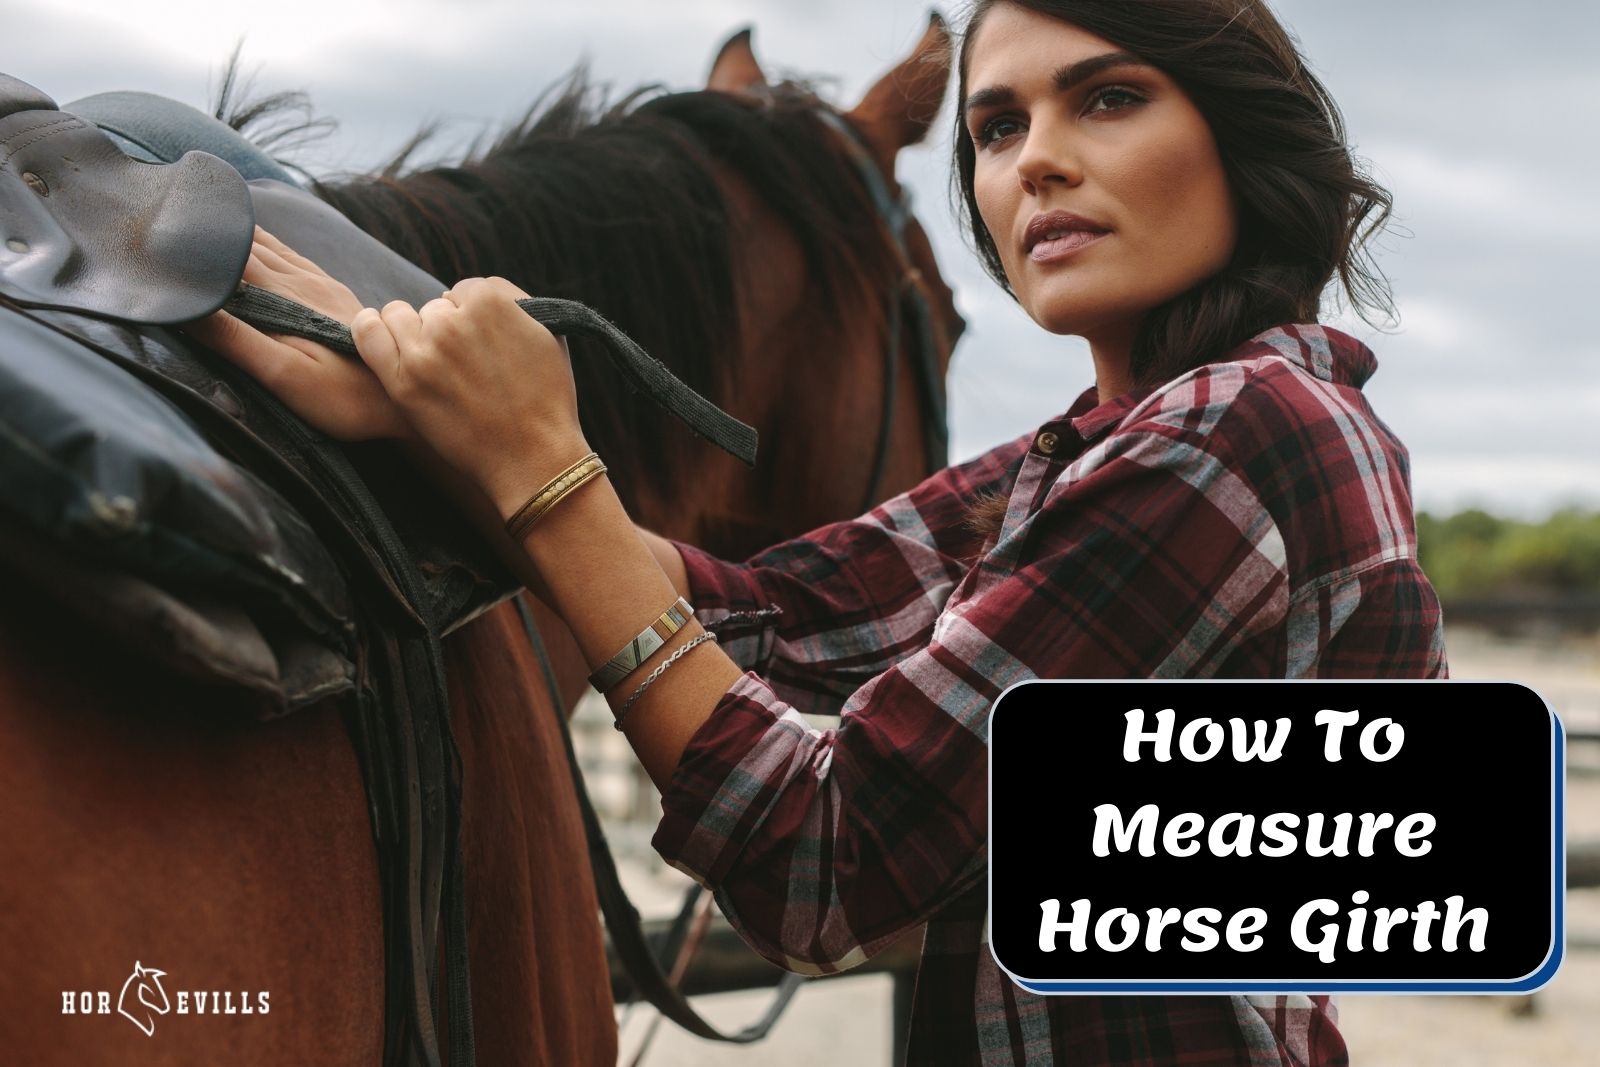 a girl in ground showing how to measure horse girth